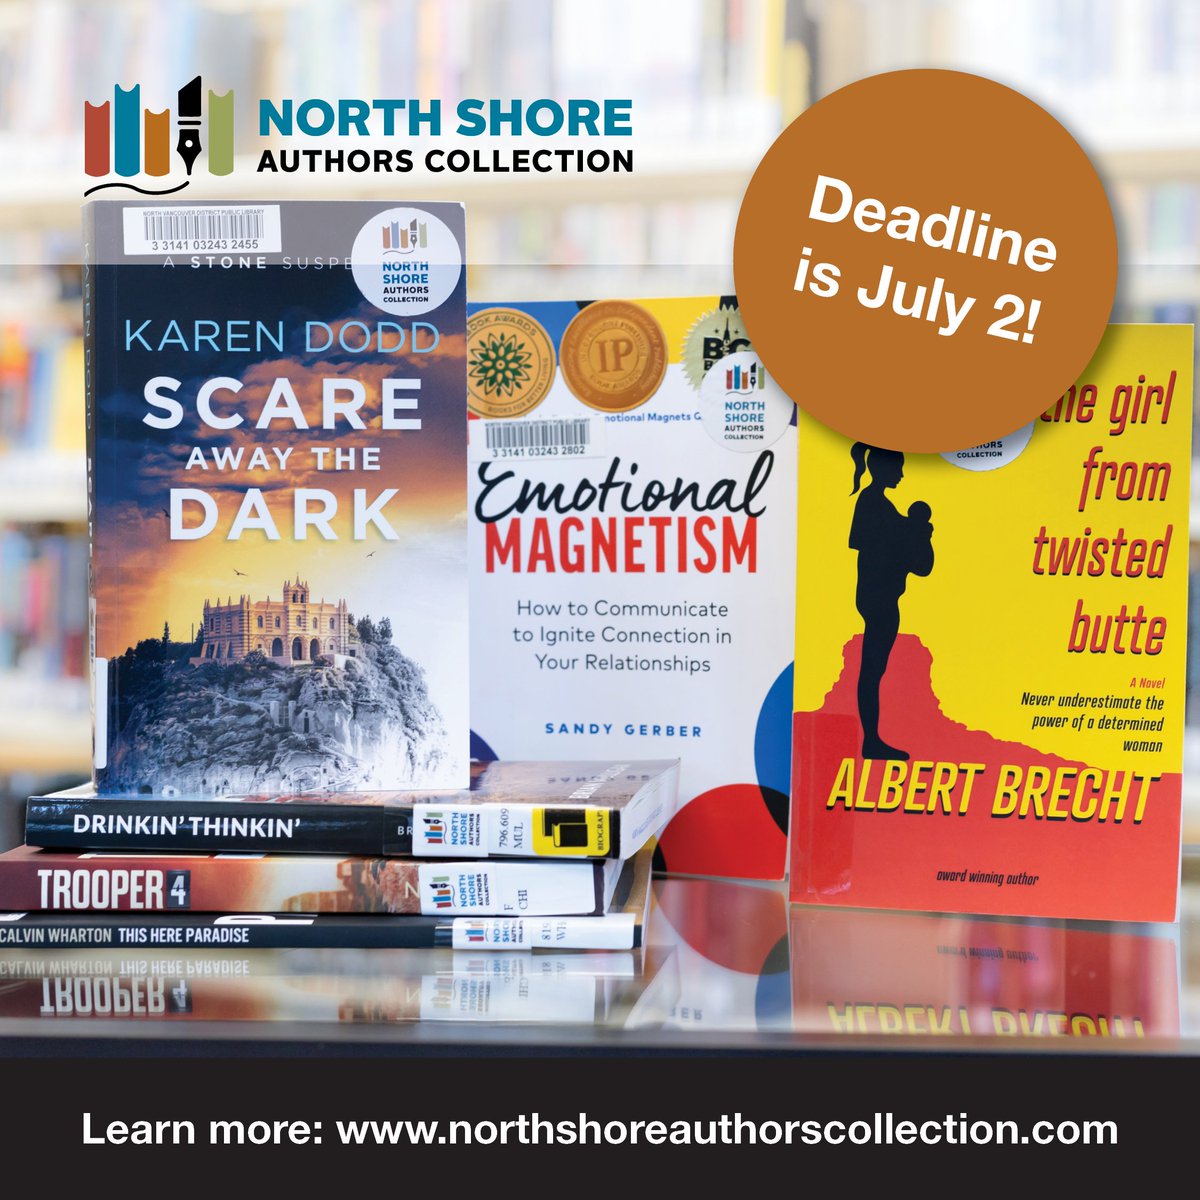 Are you an emerging or established local writer interested in having your book featured at the library? You’re in luck! North Shore Libraries are accepting applications for the North Shore Authors Collection until July 2. Details: northshoreauthorscollection.com